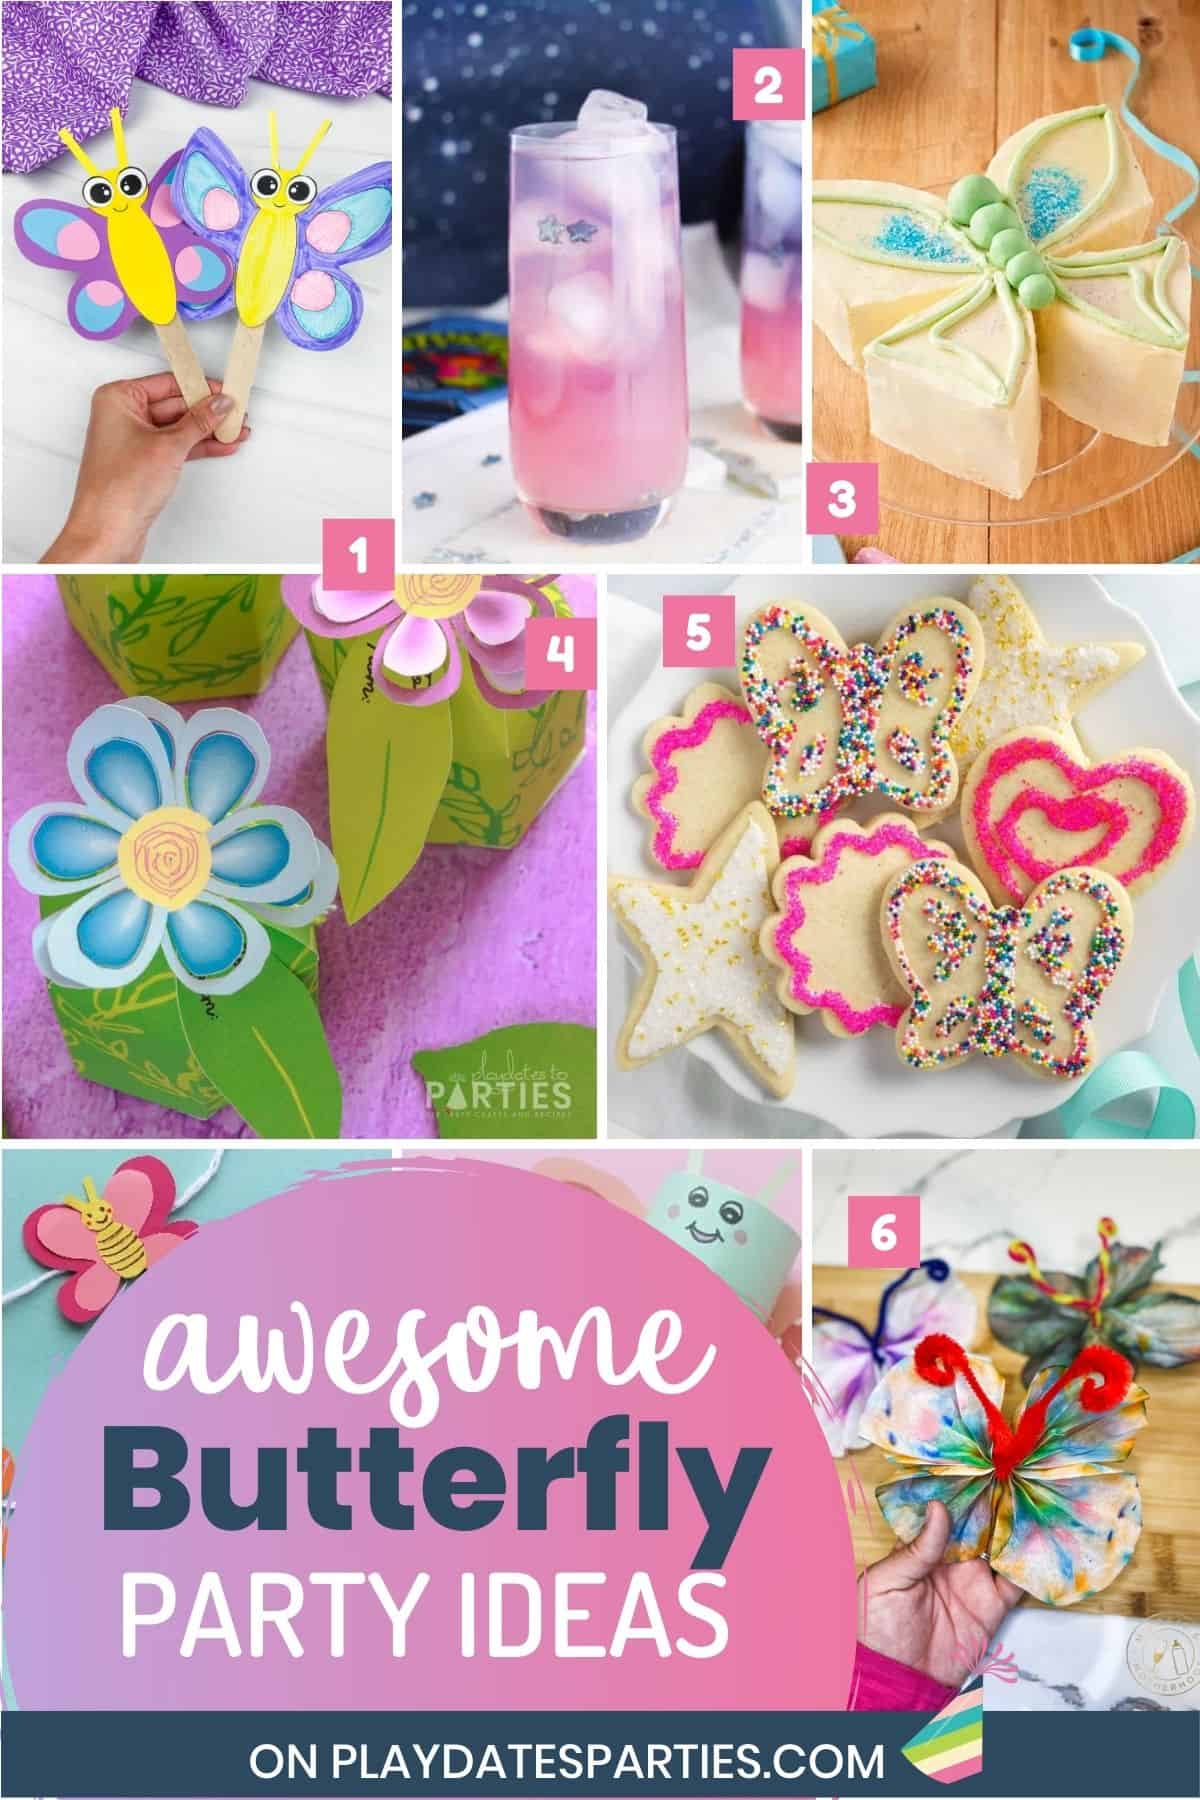 A collage of food, decorations, and crafts with text overlay awesome butterfly party ideas.